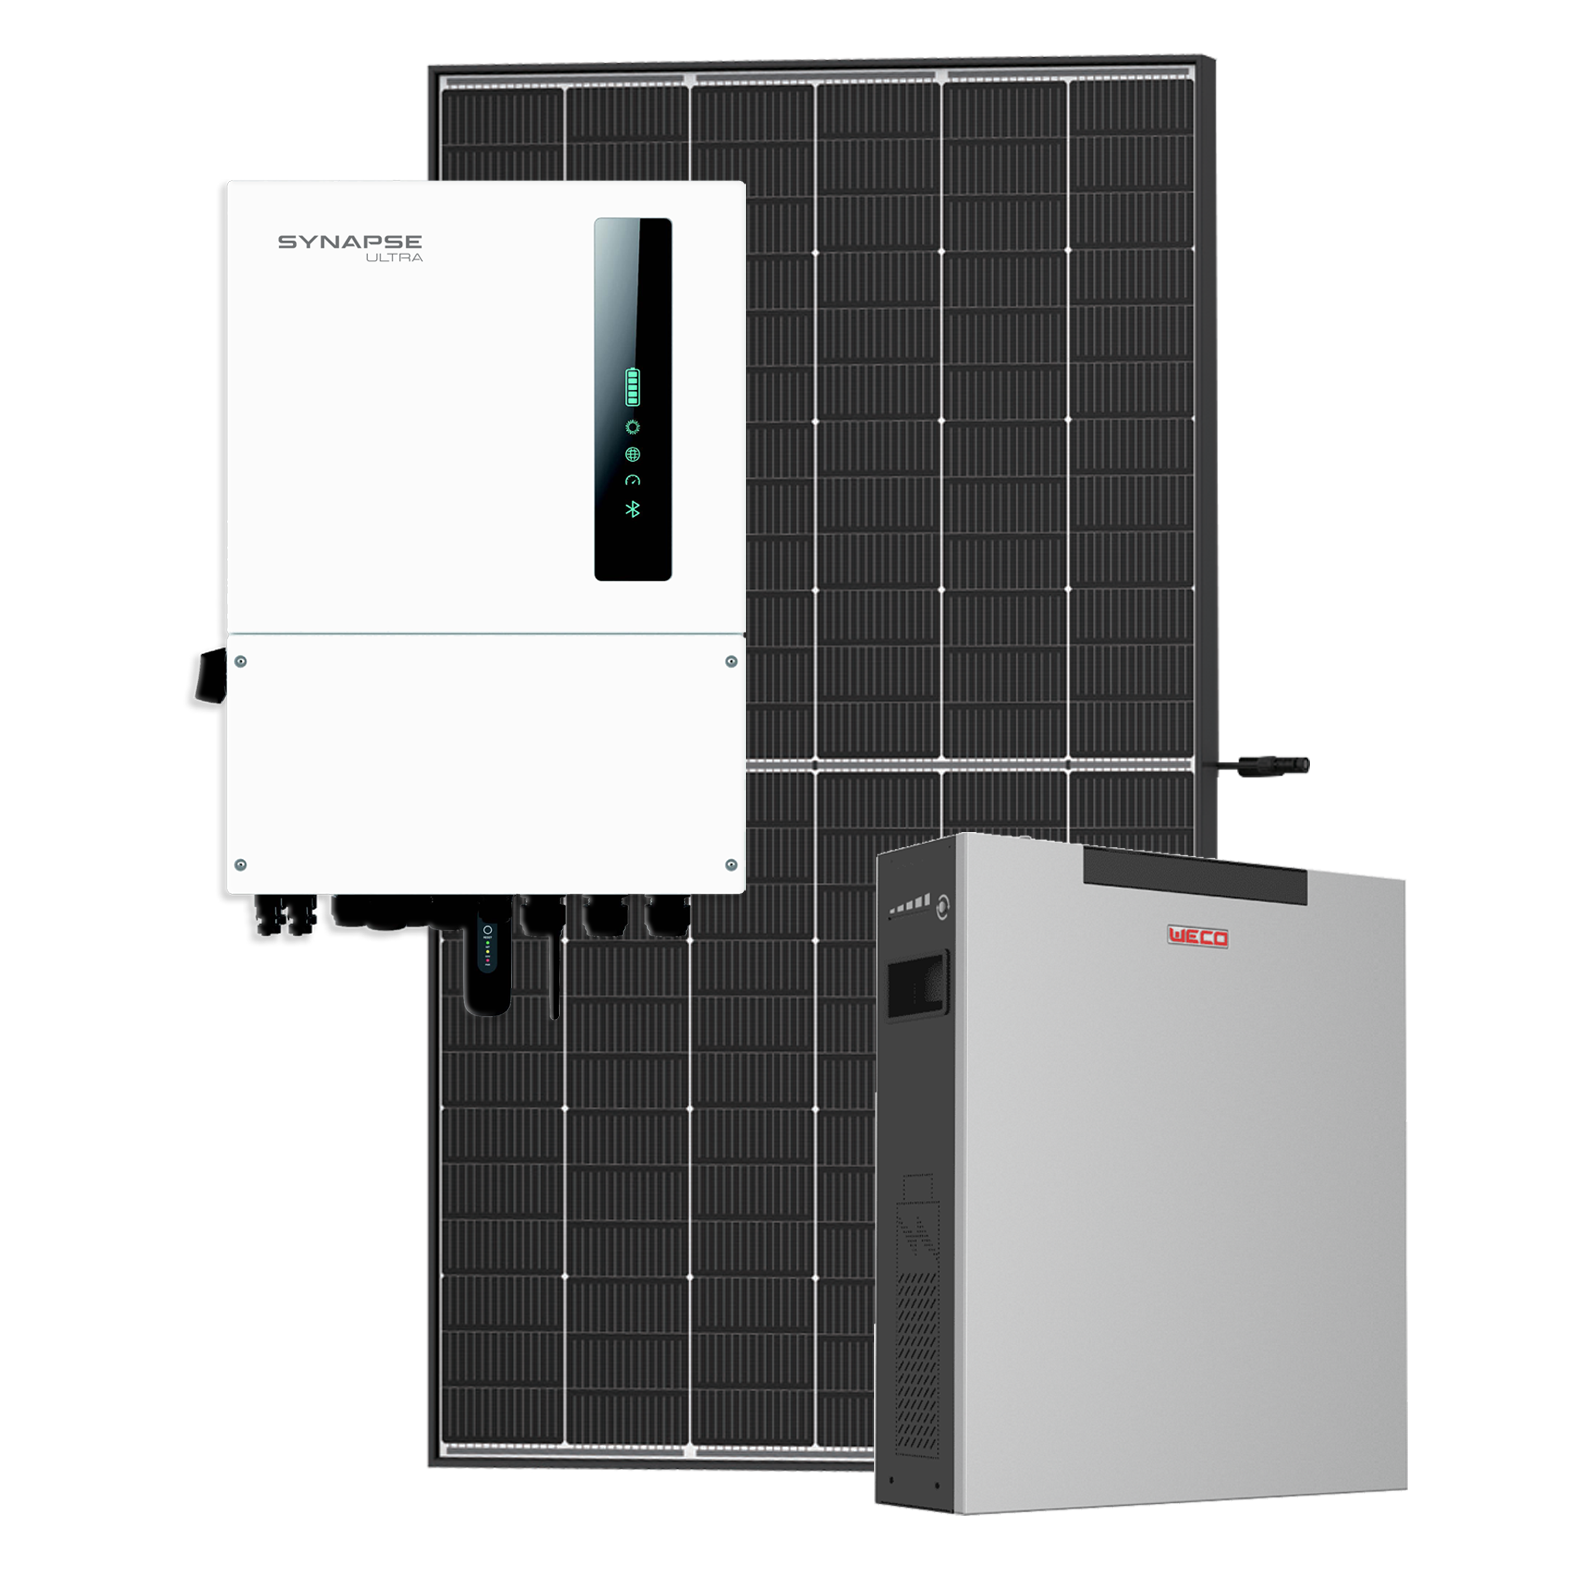 6kW Synapse Ultra, Power  4K4L Weco Core - PV & Battery Kit - 6kW Synapse Ultra Hybrid Inverter, 4K4L Weco  Power 48V  Battery and 6x 420W Trina panels